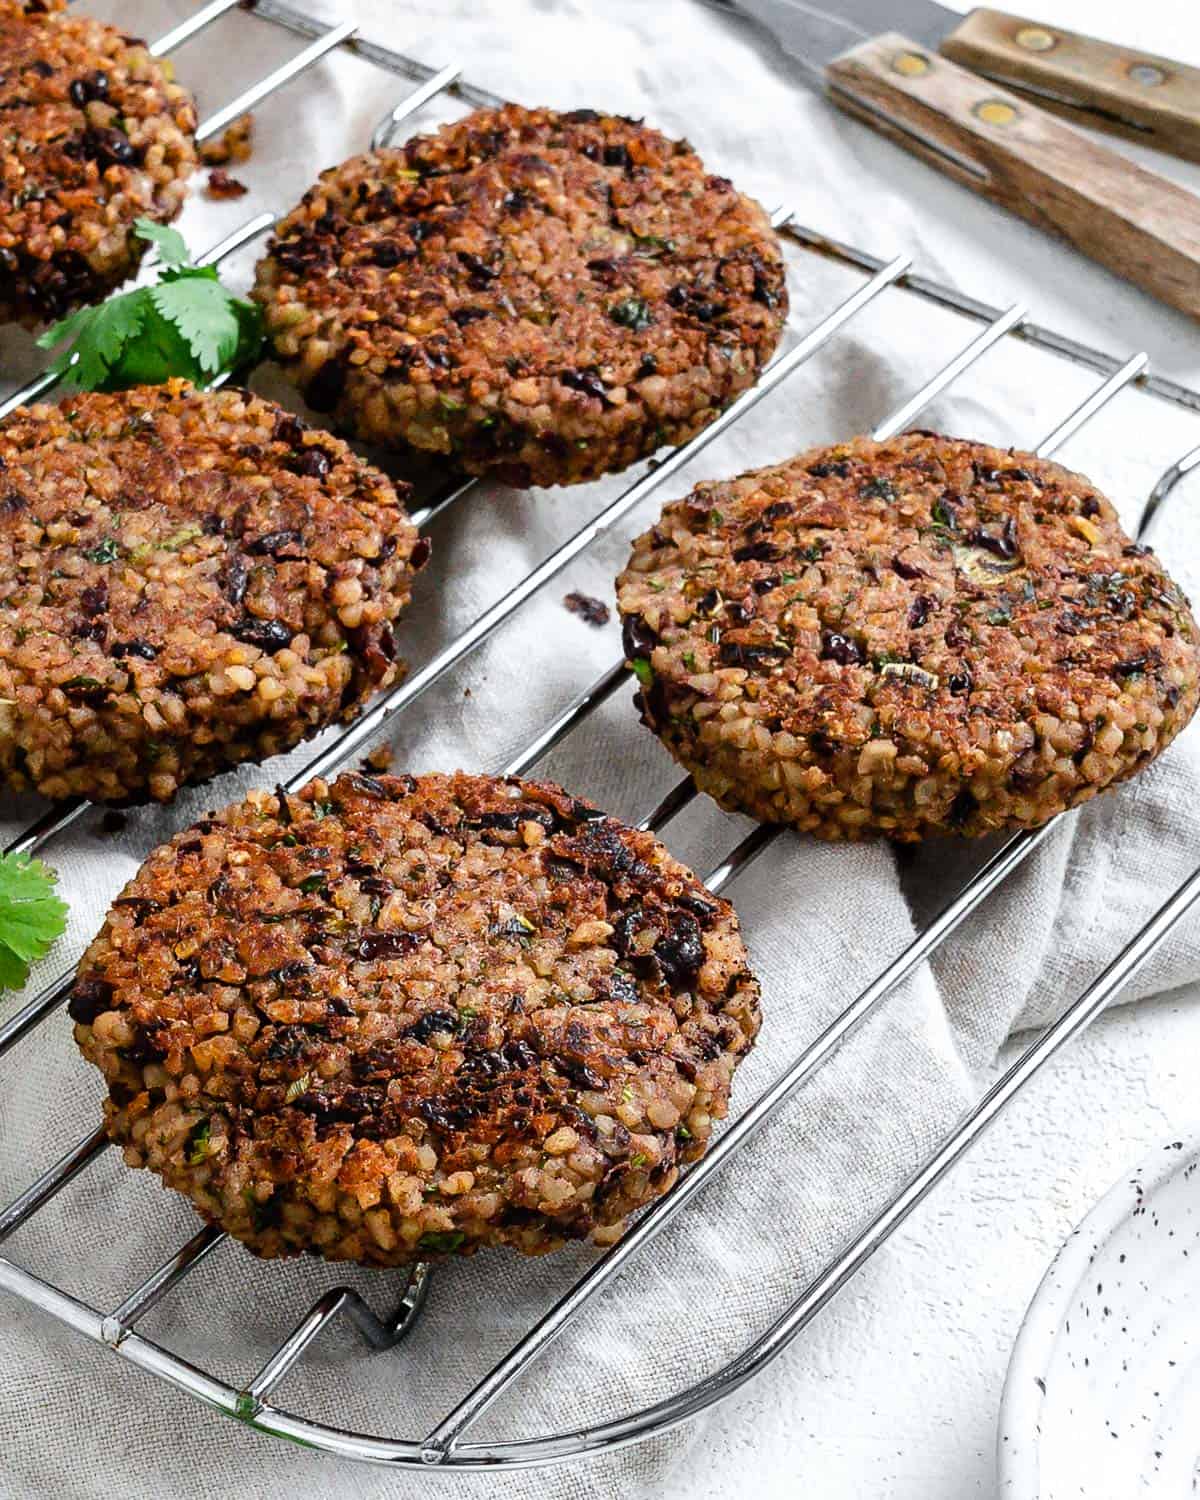 completed Vegan Black Bean and Bulgur Burgers on a wire rack against a light surface